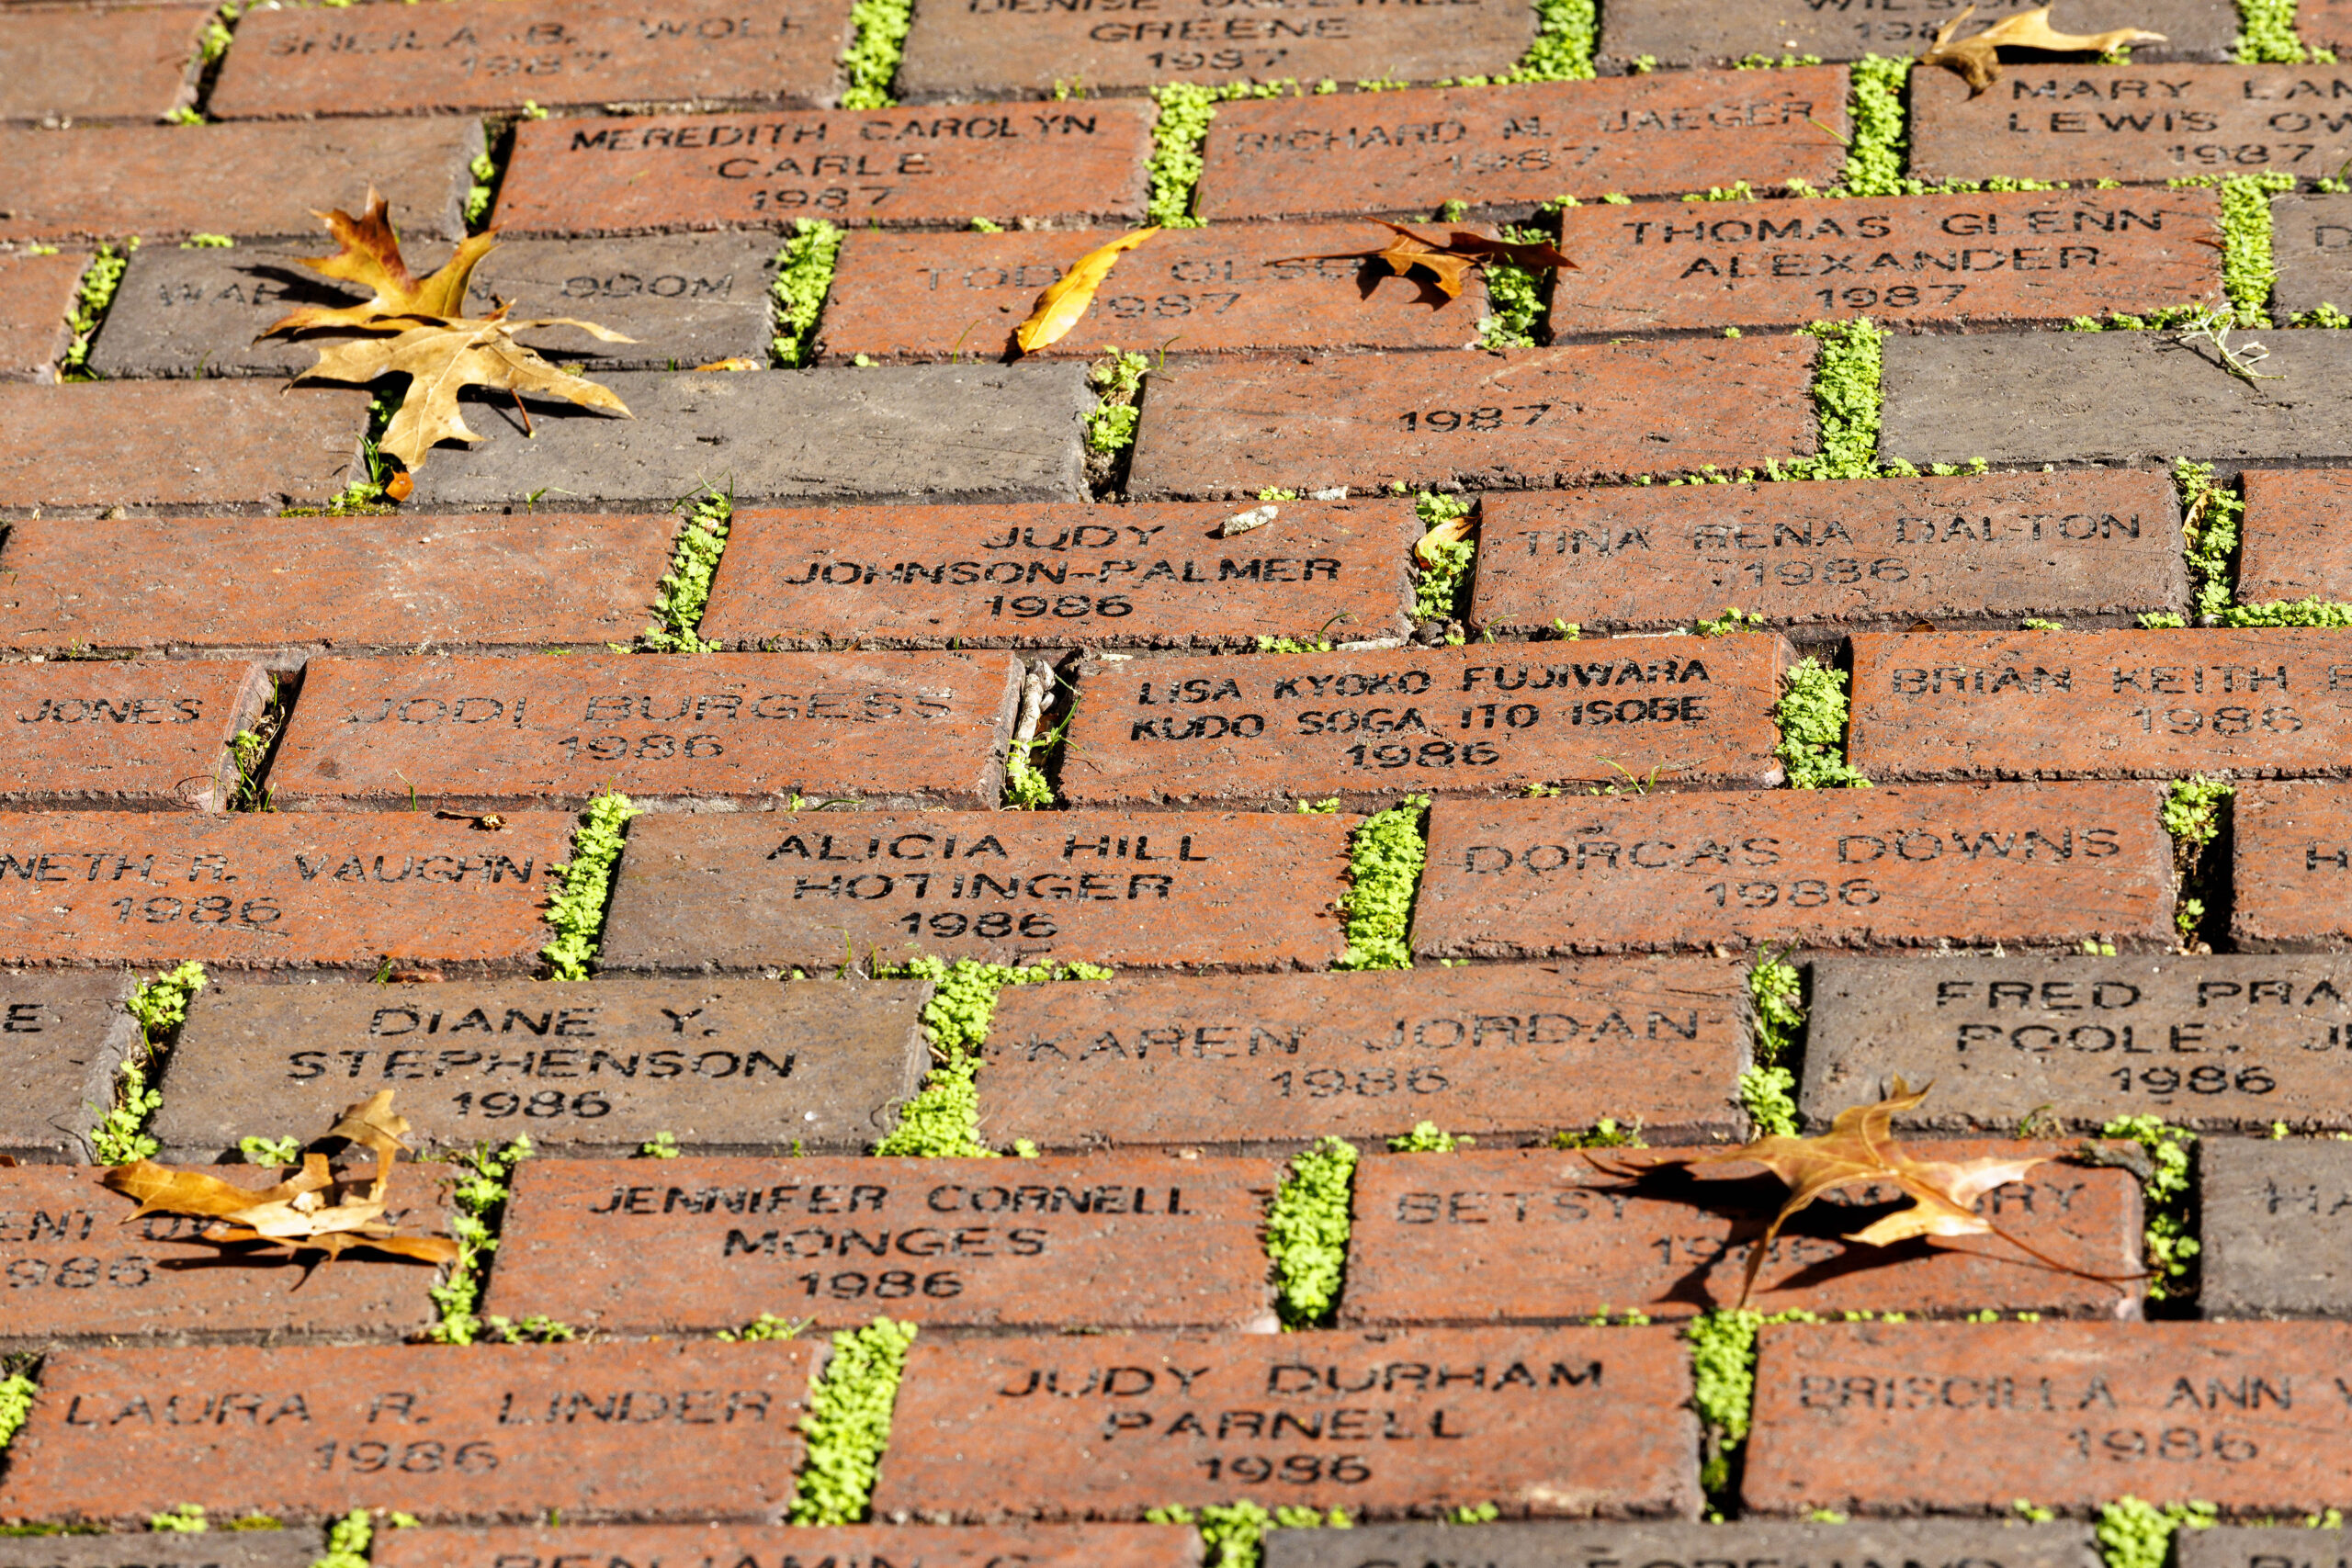 Fall leaves lie on a brick walkway with names carved into the bricks.